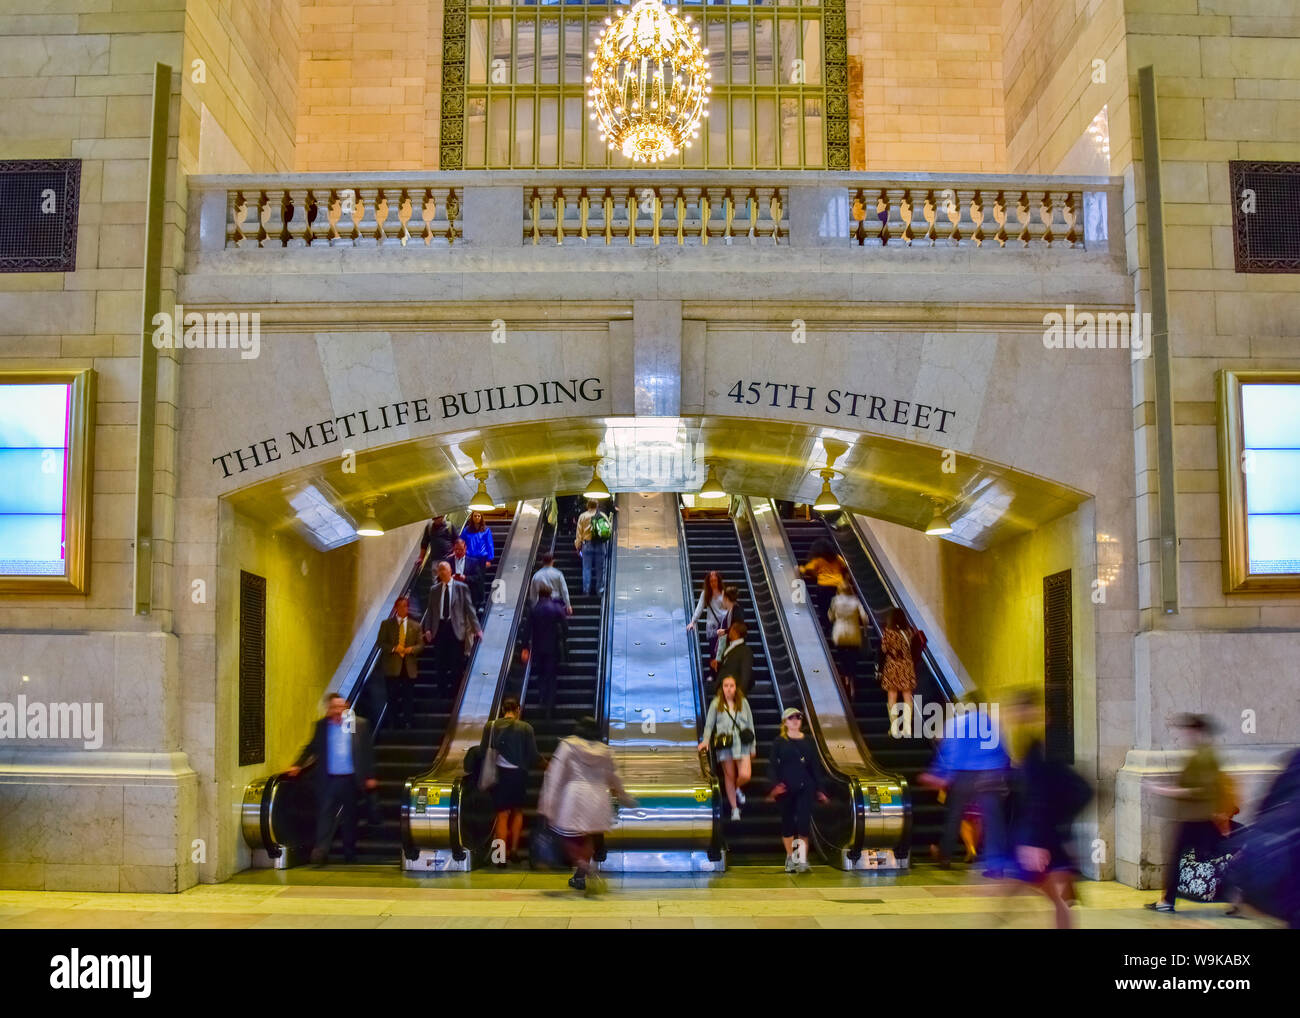 Grand Central Station, Midtown, Manhattan, New York, United States of America, North America Stock Photo